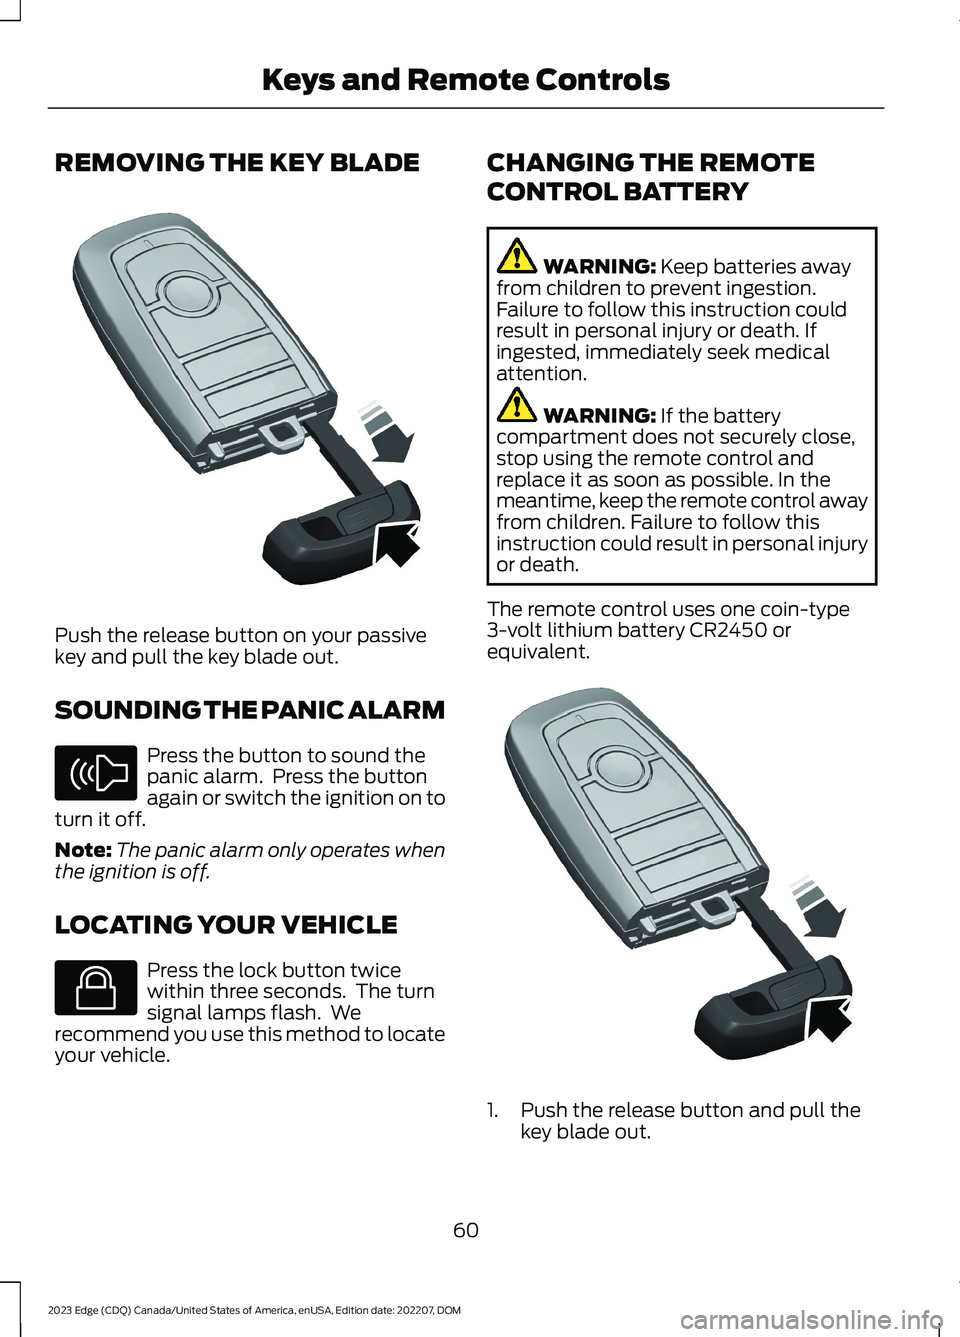 FORD EDGE 2023  Owners Manual REMOVING THE KEY BLADE
Push the release button on your passivekey and pull the key blade out.
SOUNDING THE PANIC ALARM
Press the button to sound thepanic alarm.  Press the buttonagain or switch the ig